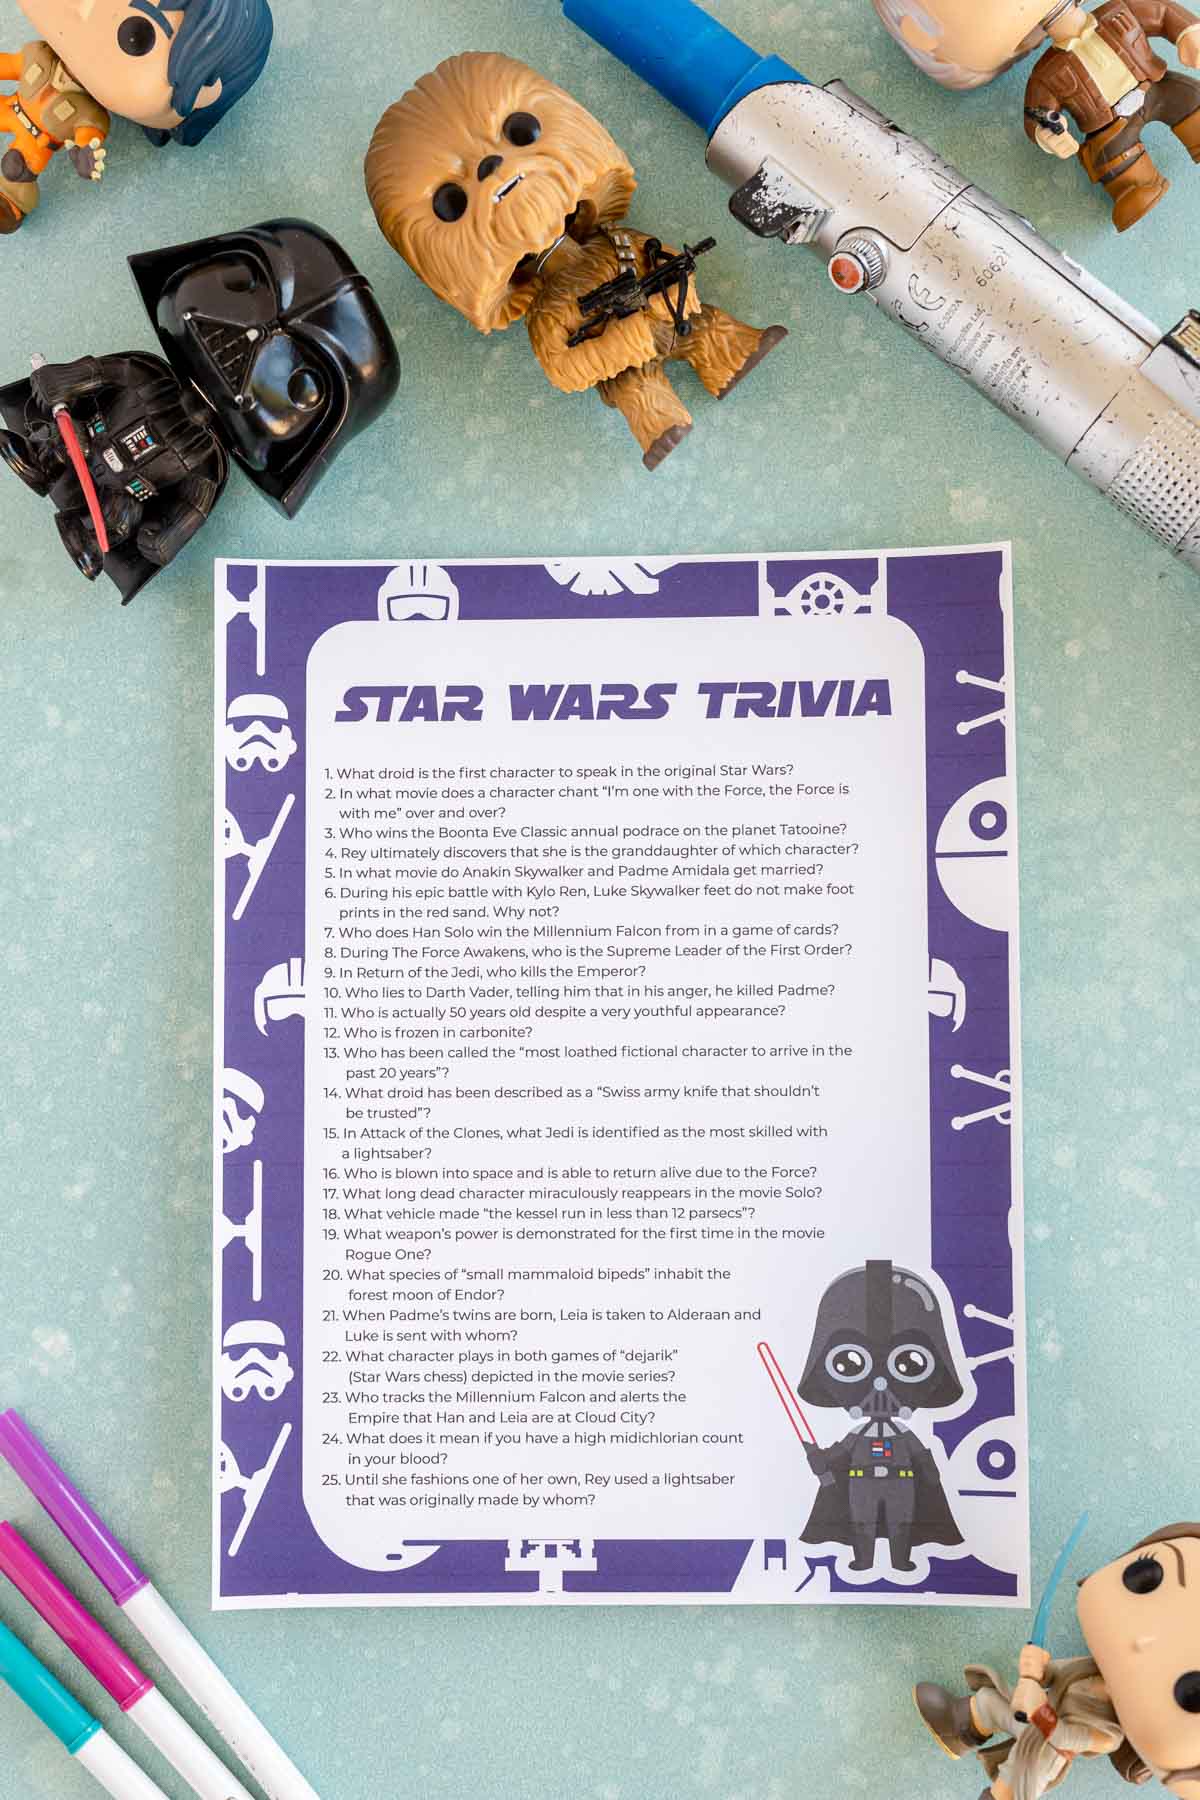 Star Wars Trivia Night Quiz 50 Cards Free Postage 250 Questions 